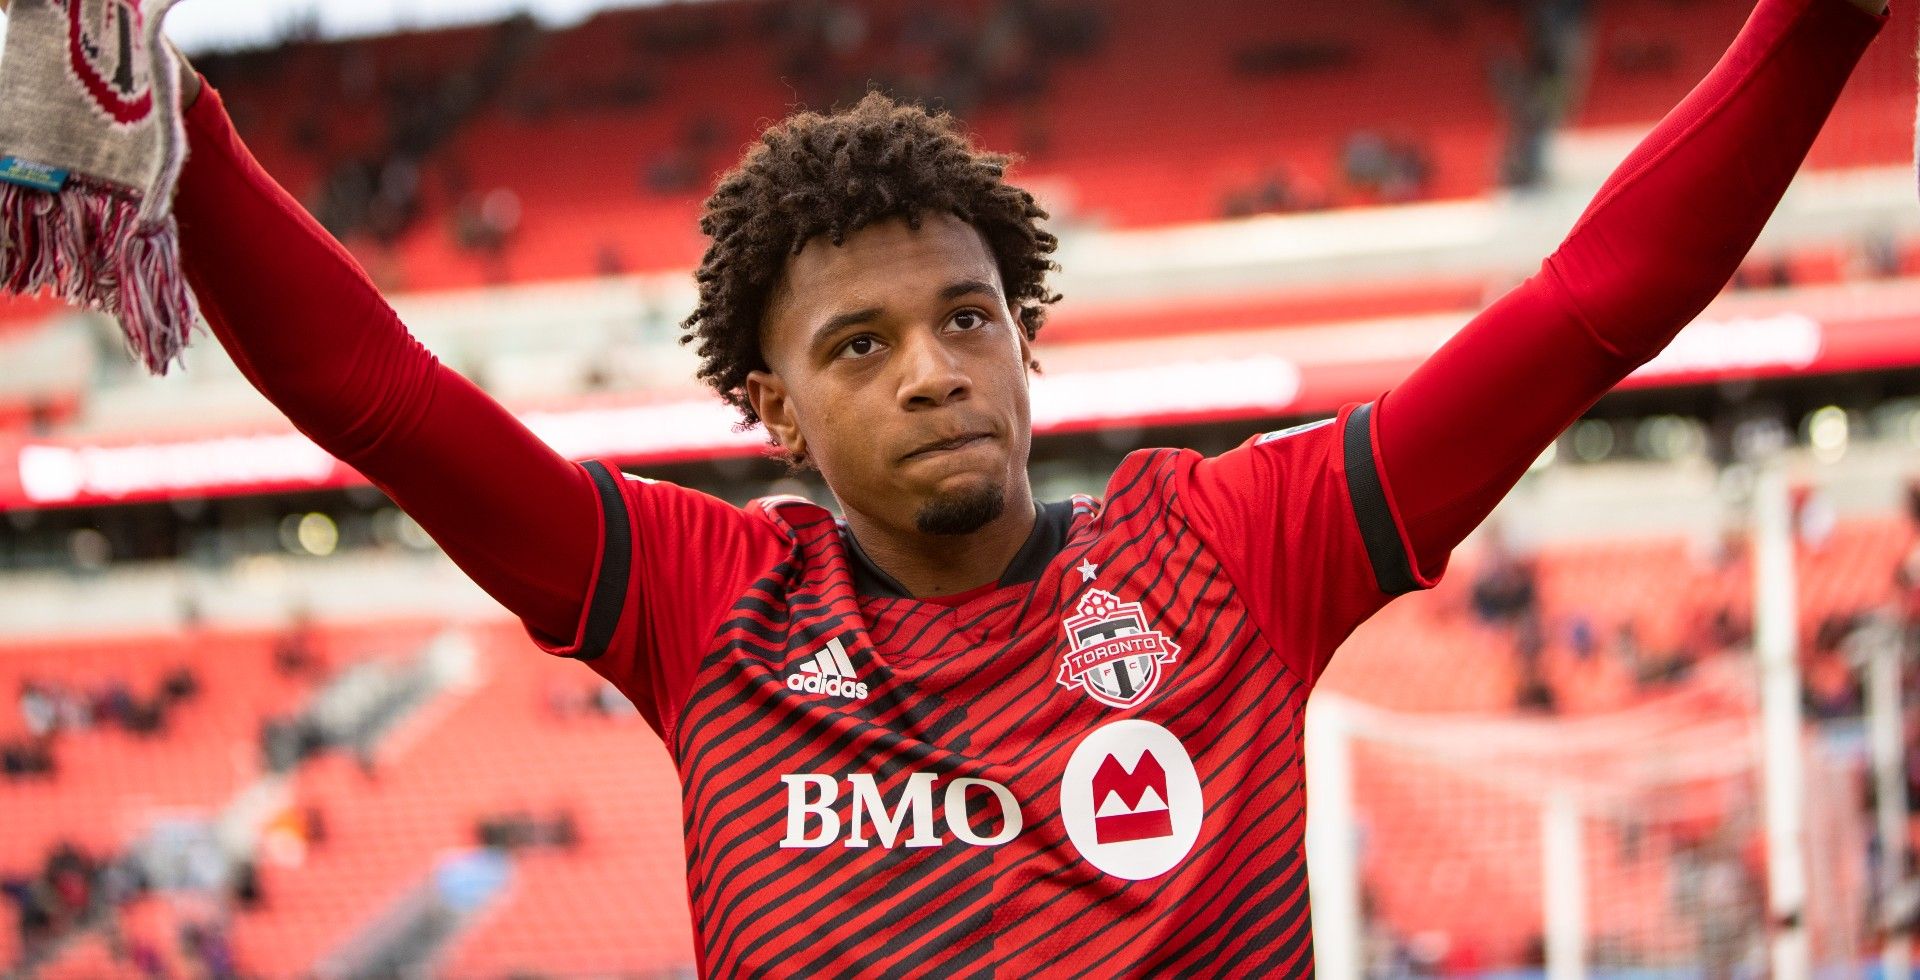 From the youth academy to Toronto FC: The amazing ascent of Kosi Thompson